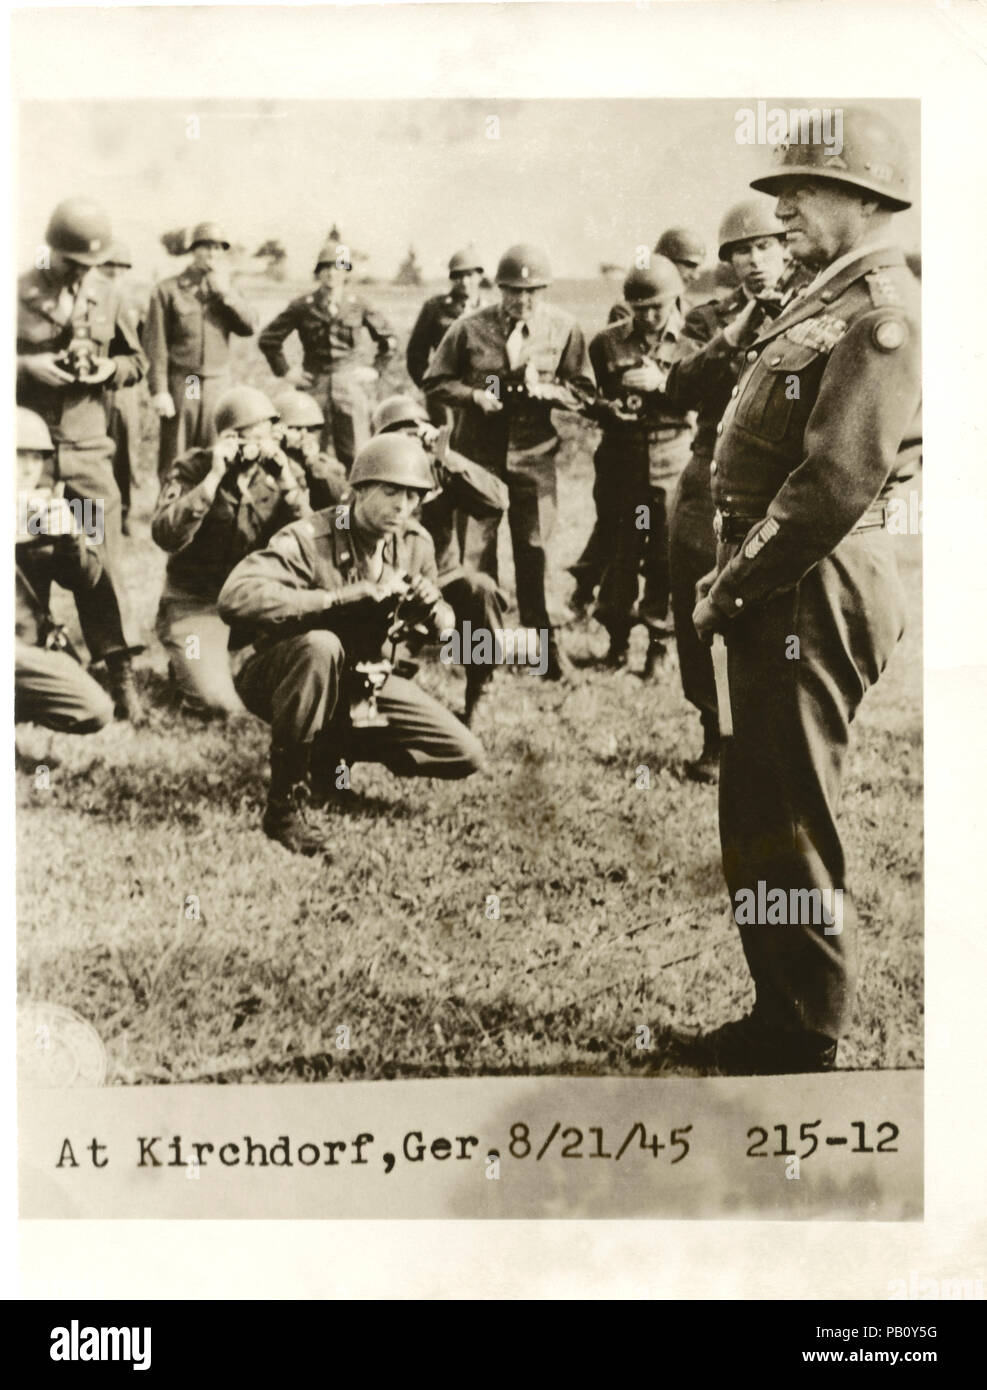 U.S. General George Patton with Troops, Kirchdorf, Germany, August 21, 1945 Stock Photo